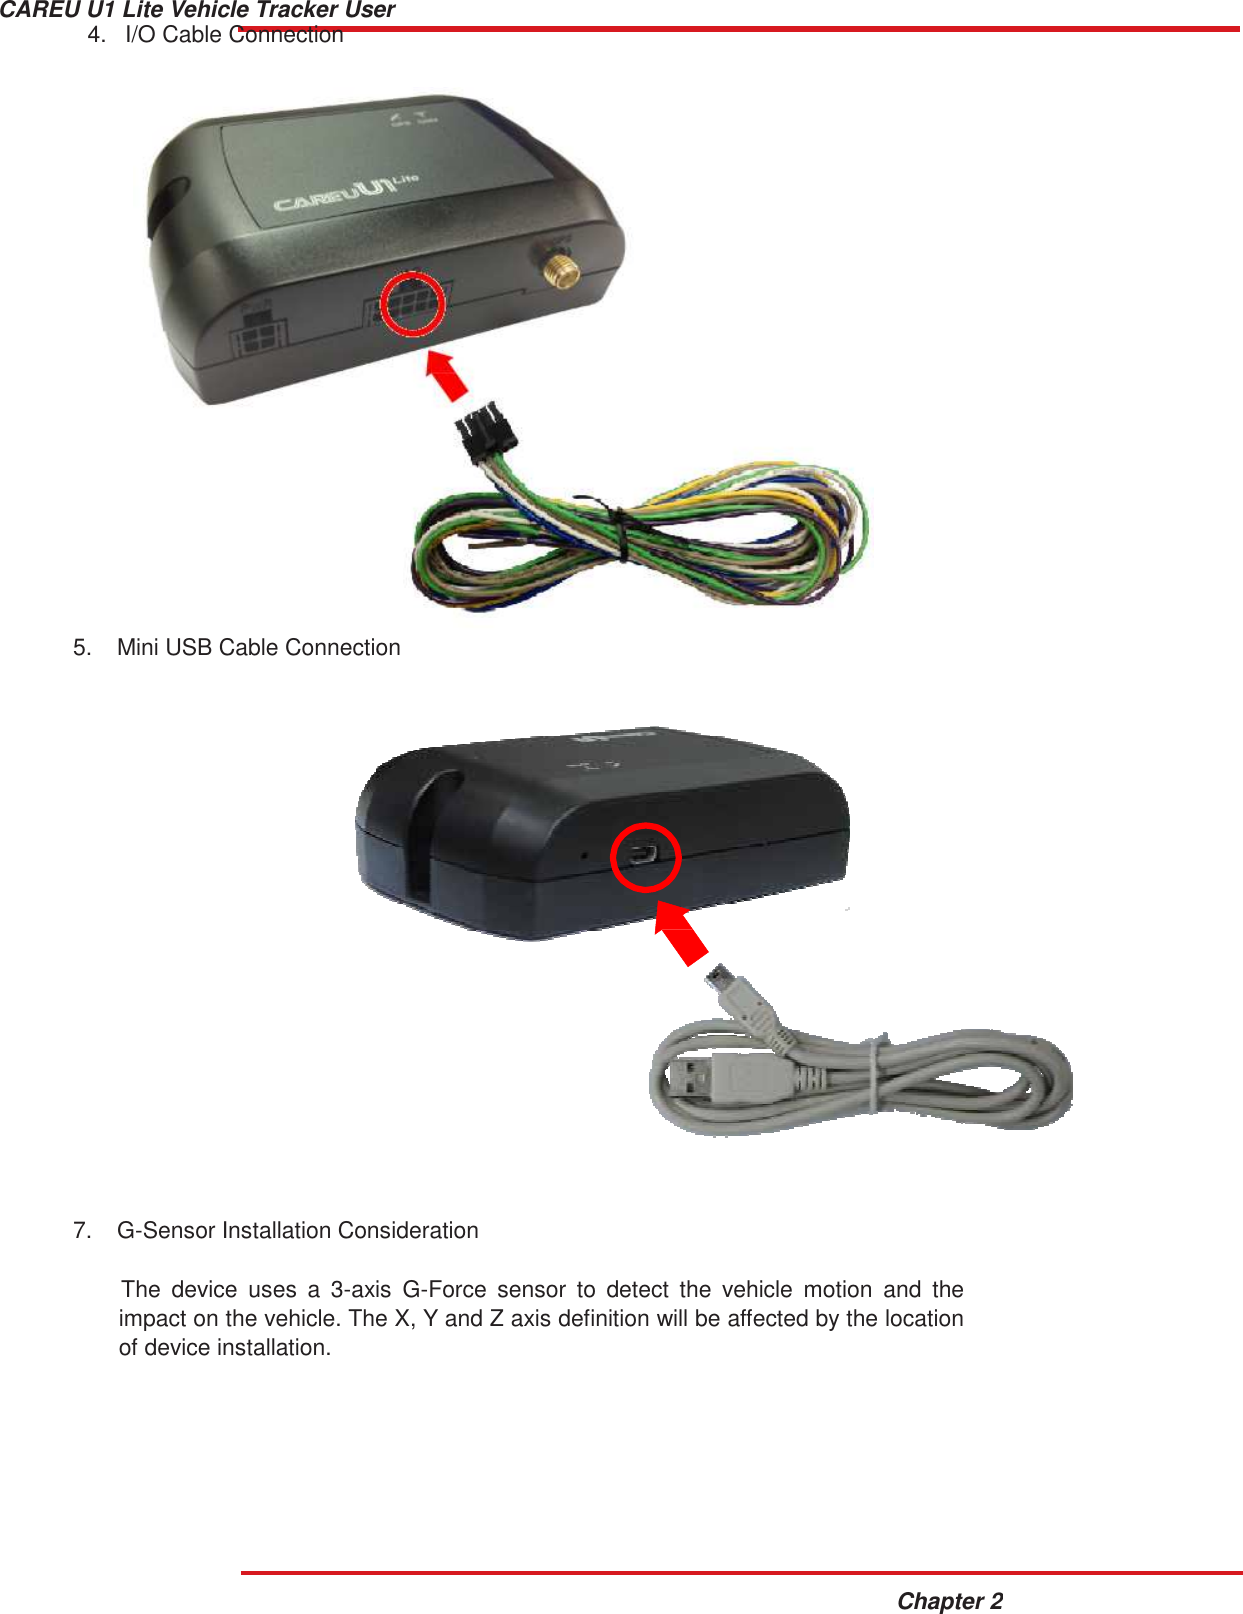 CAREU U1 Lite Vehicle Tracker User Guide Chapter 2   4.   I/O Cable Connection                             5.  Mini USB Cable Connection                            7.  G-Sensor Installation Consideration   The  device  uses  a  3-axis  G-Force  sensor  to  detect  the  vehicle  motion  and  the impact on the vehicle. The X, Y and Z axis definition will be affected by the location of device installation. 